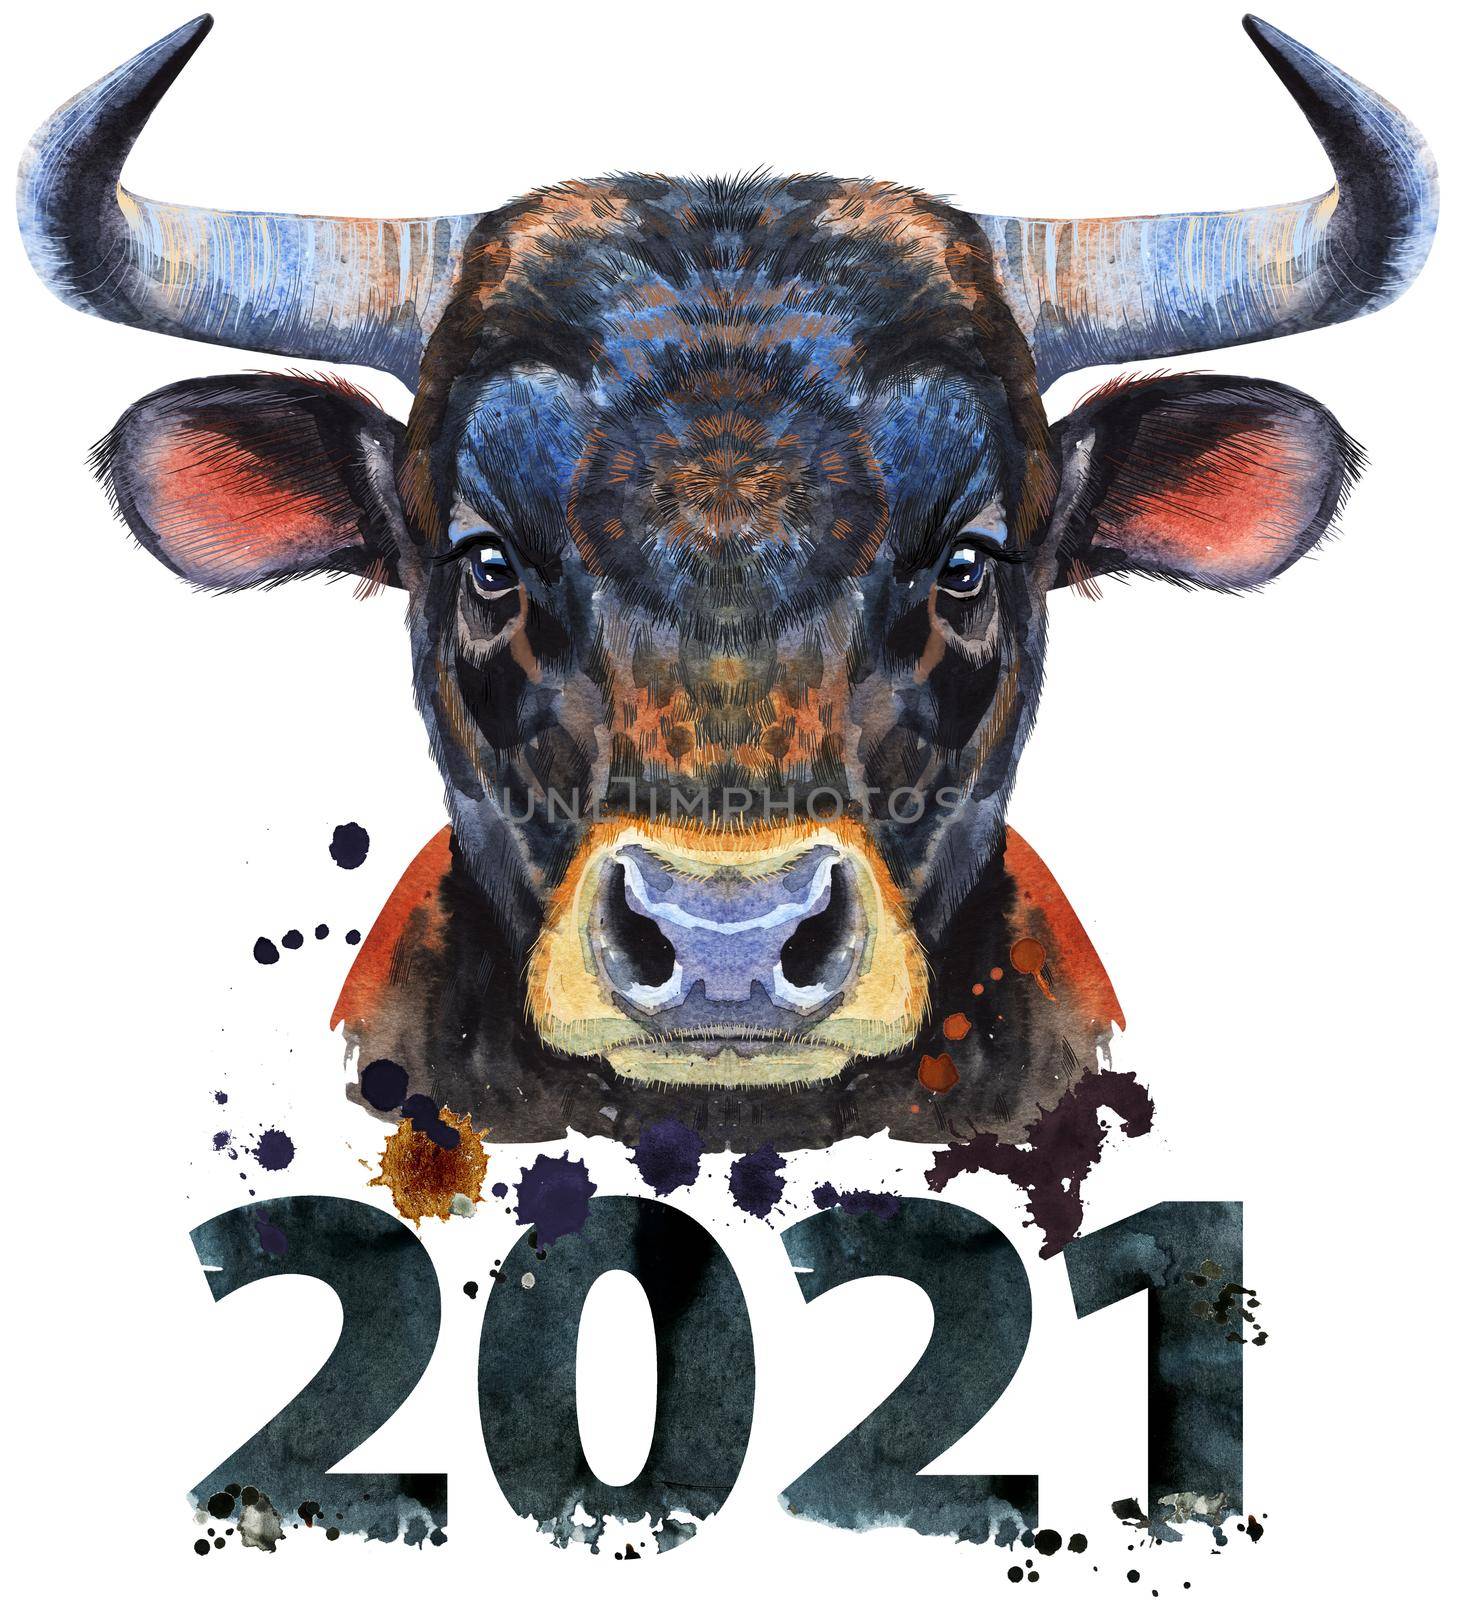 Black powerful bull with number 2021 watercolor graphics. Bull animal illustration with splash watercolor textured background.